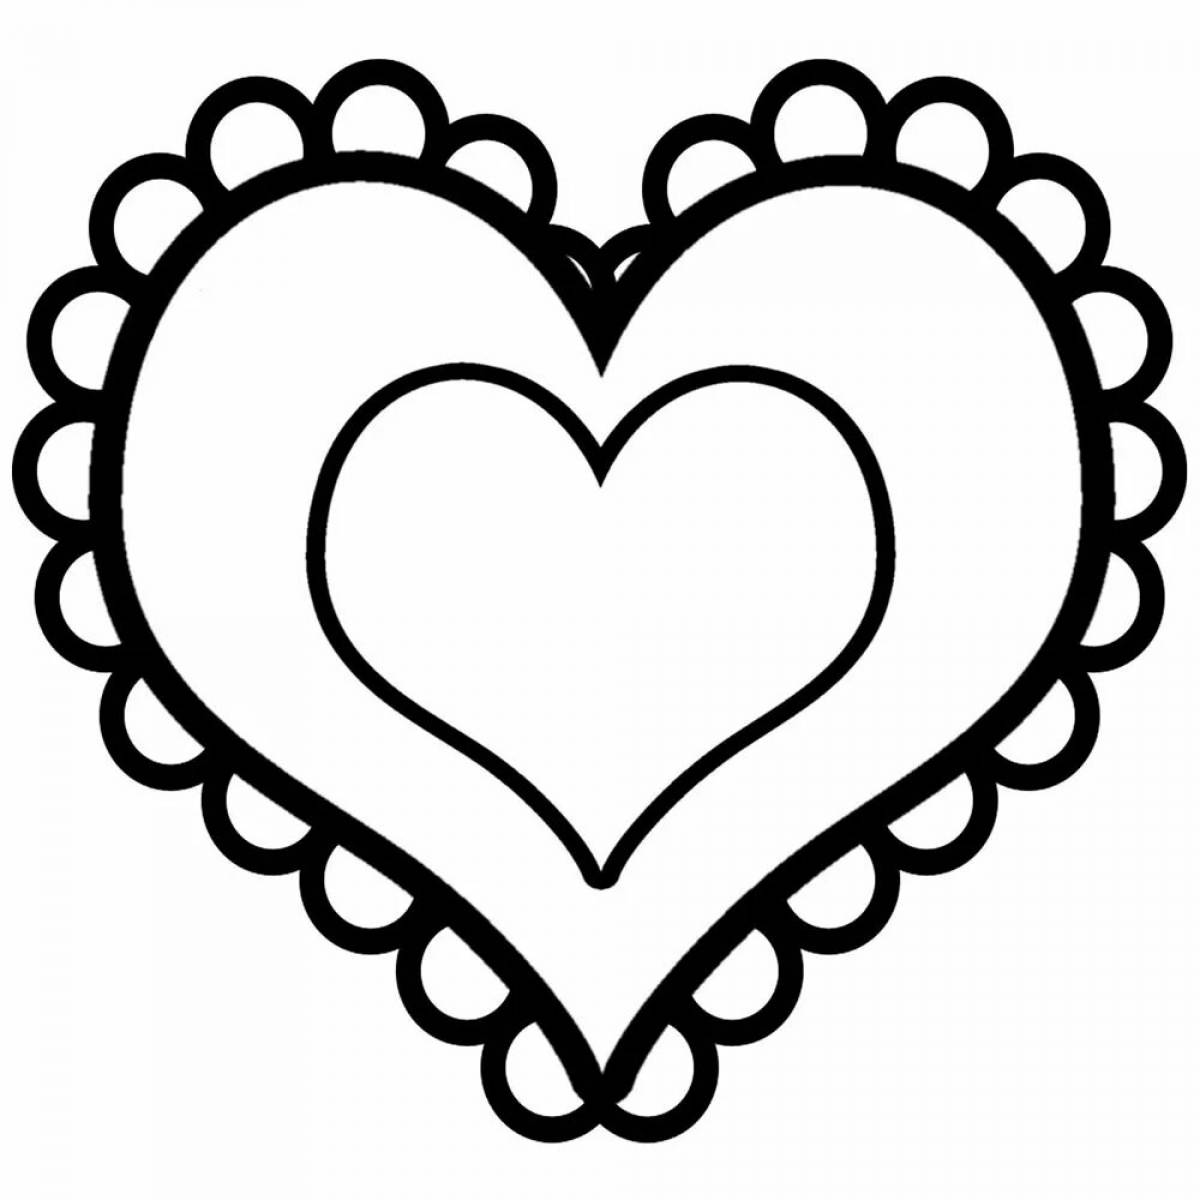 Colored heart coloring page for 3-4 year olds